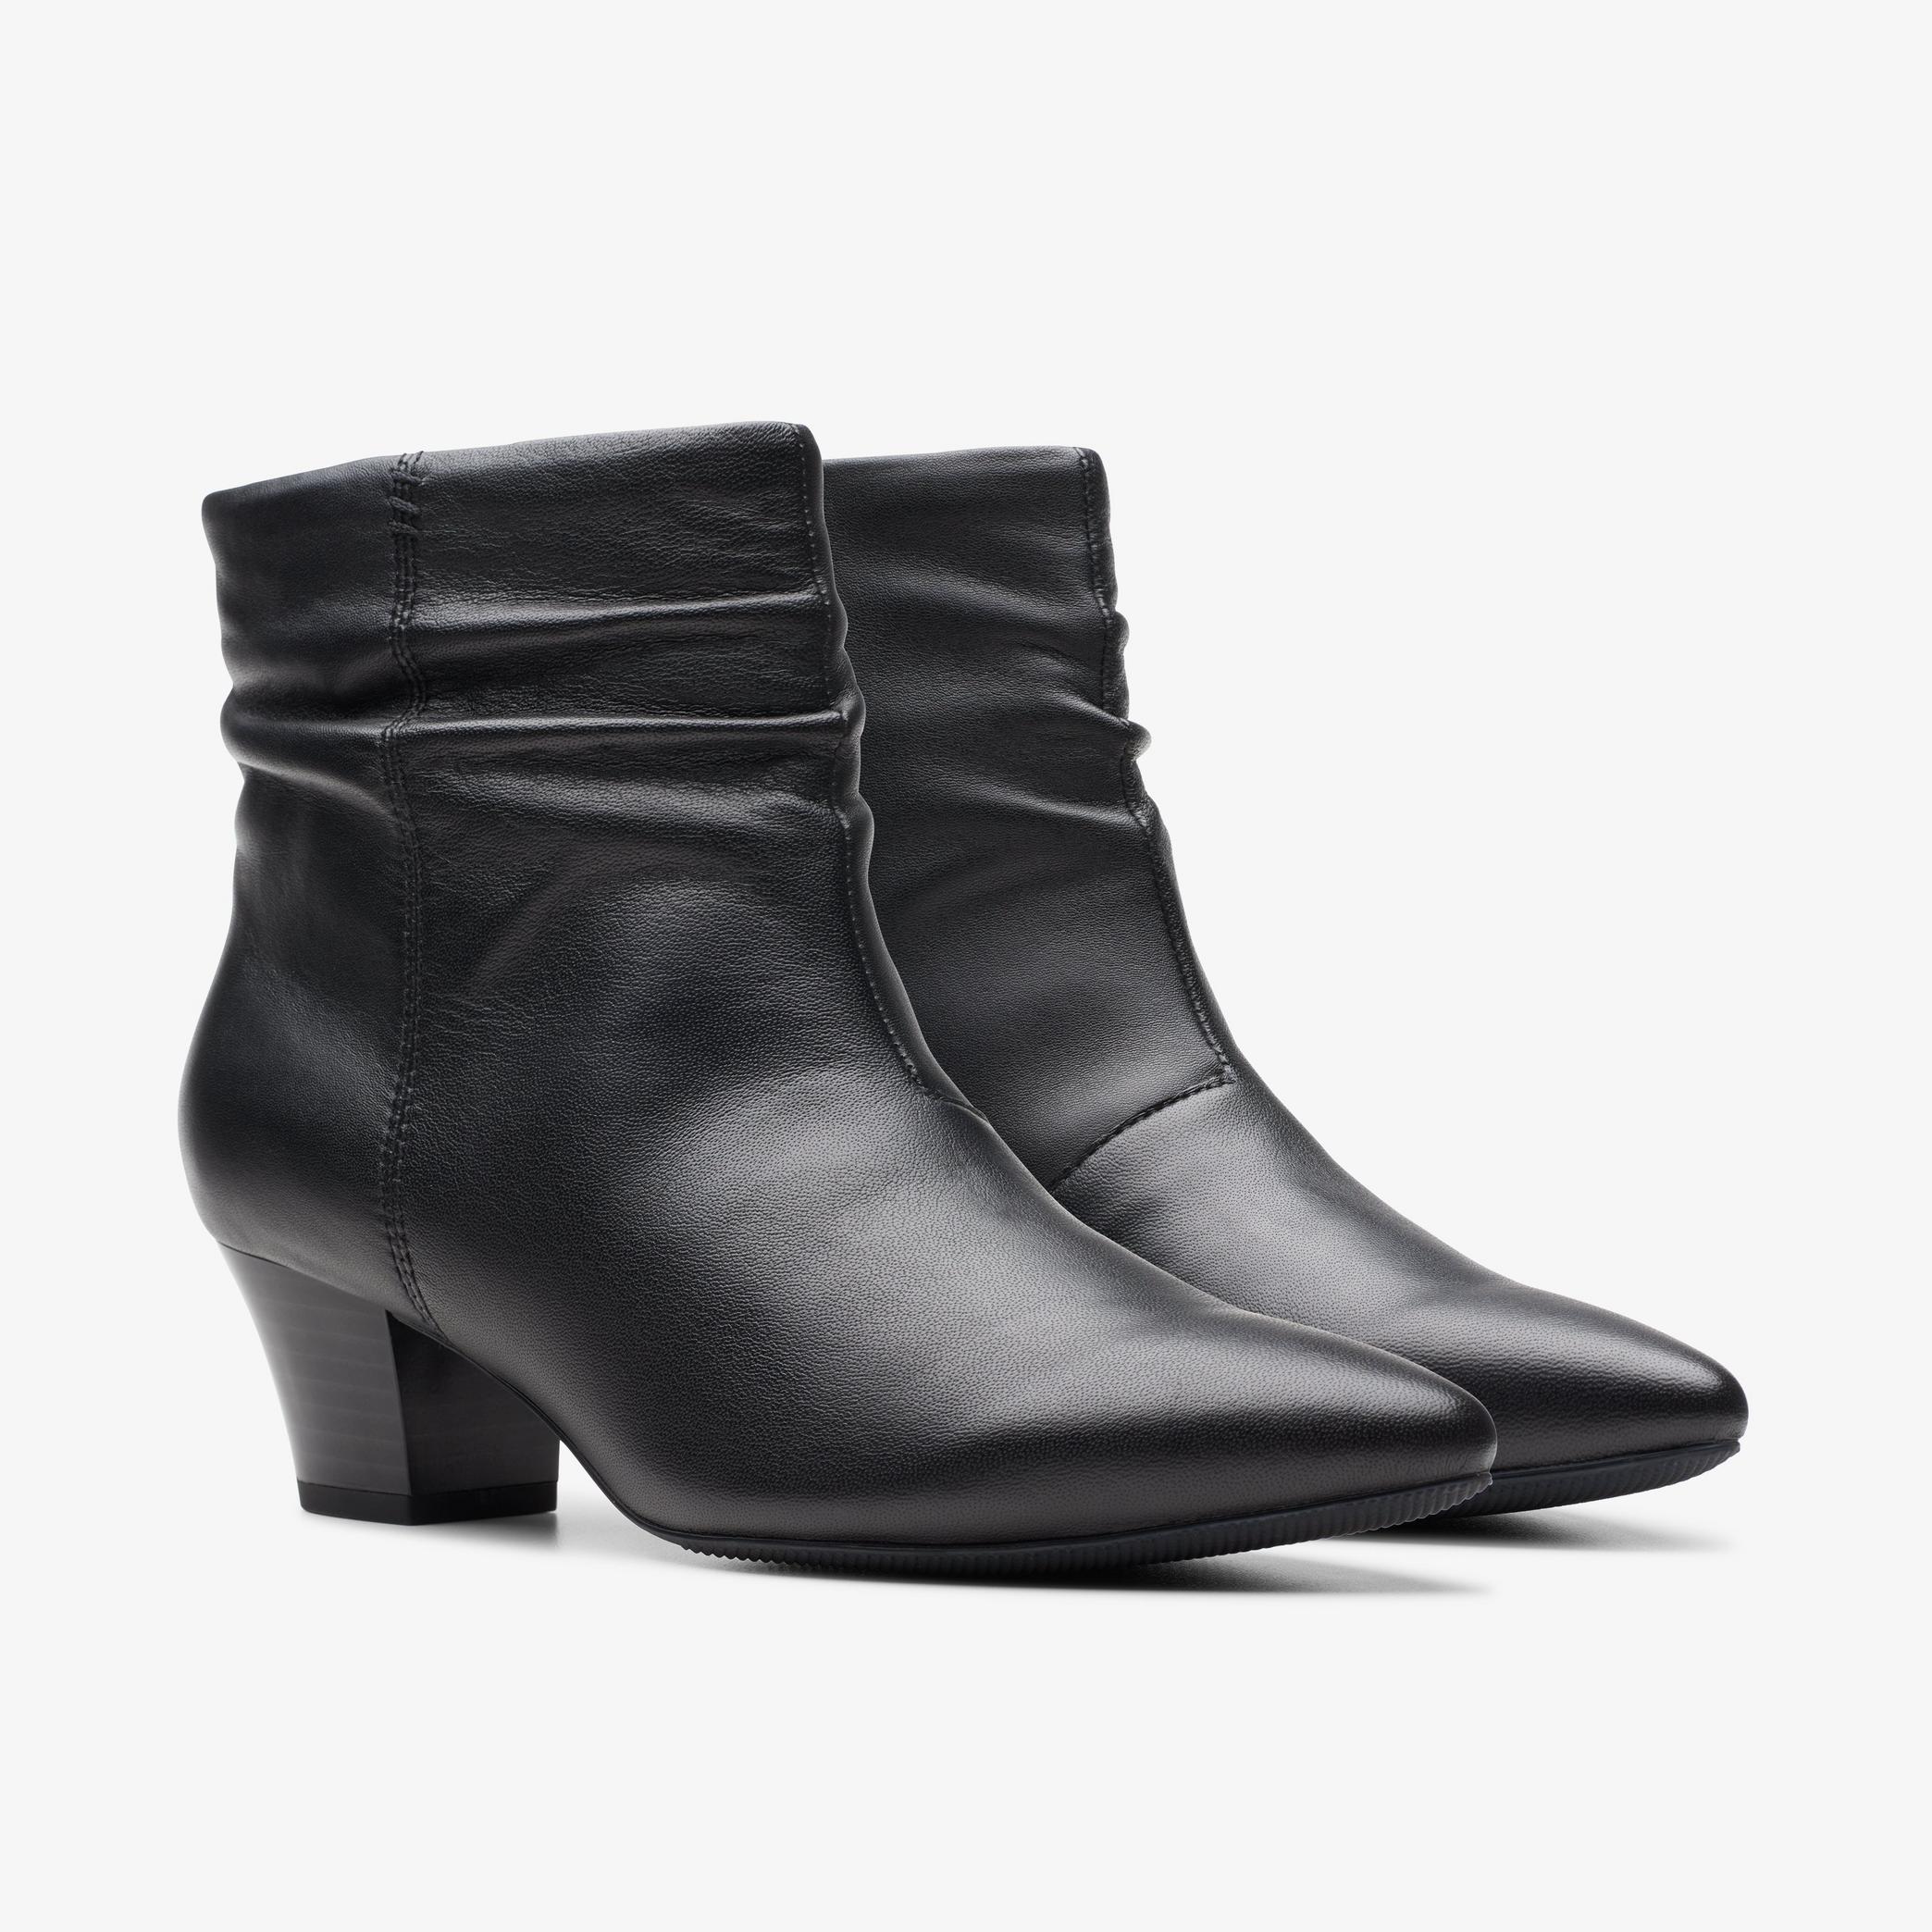 Teresa Skip Black Leather Ankle Boots, view 4 of 6